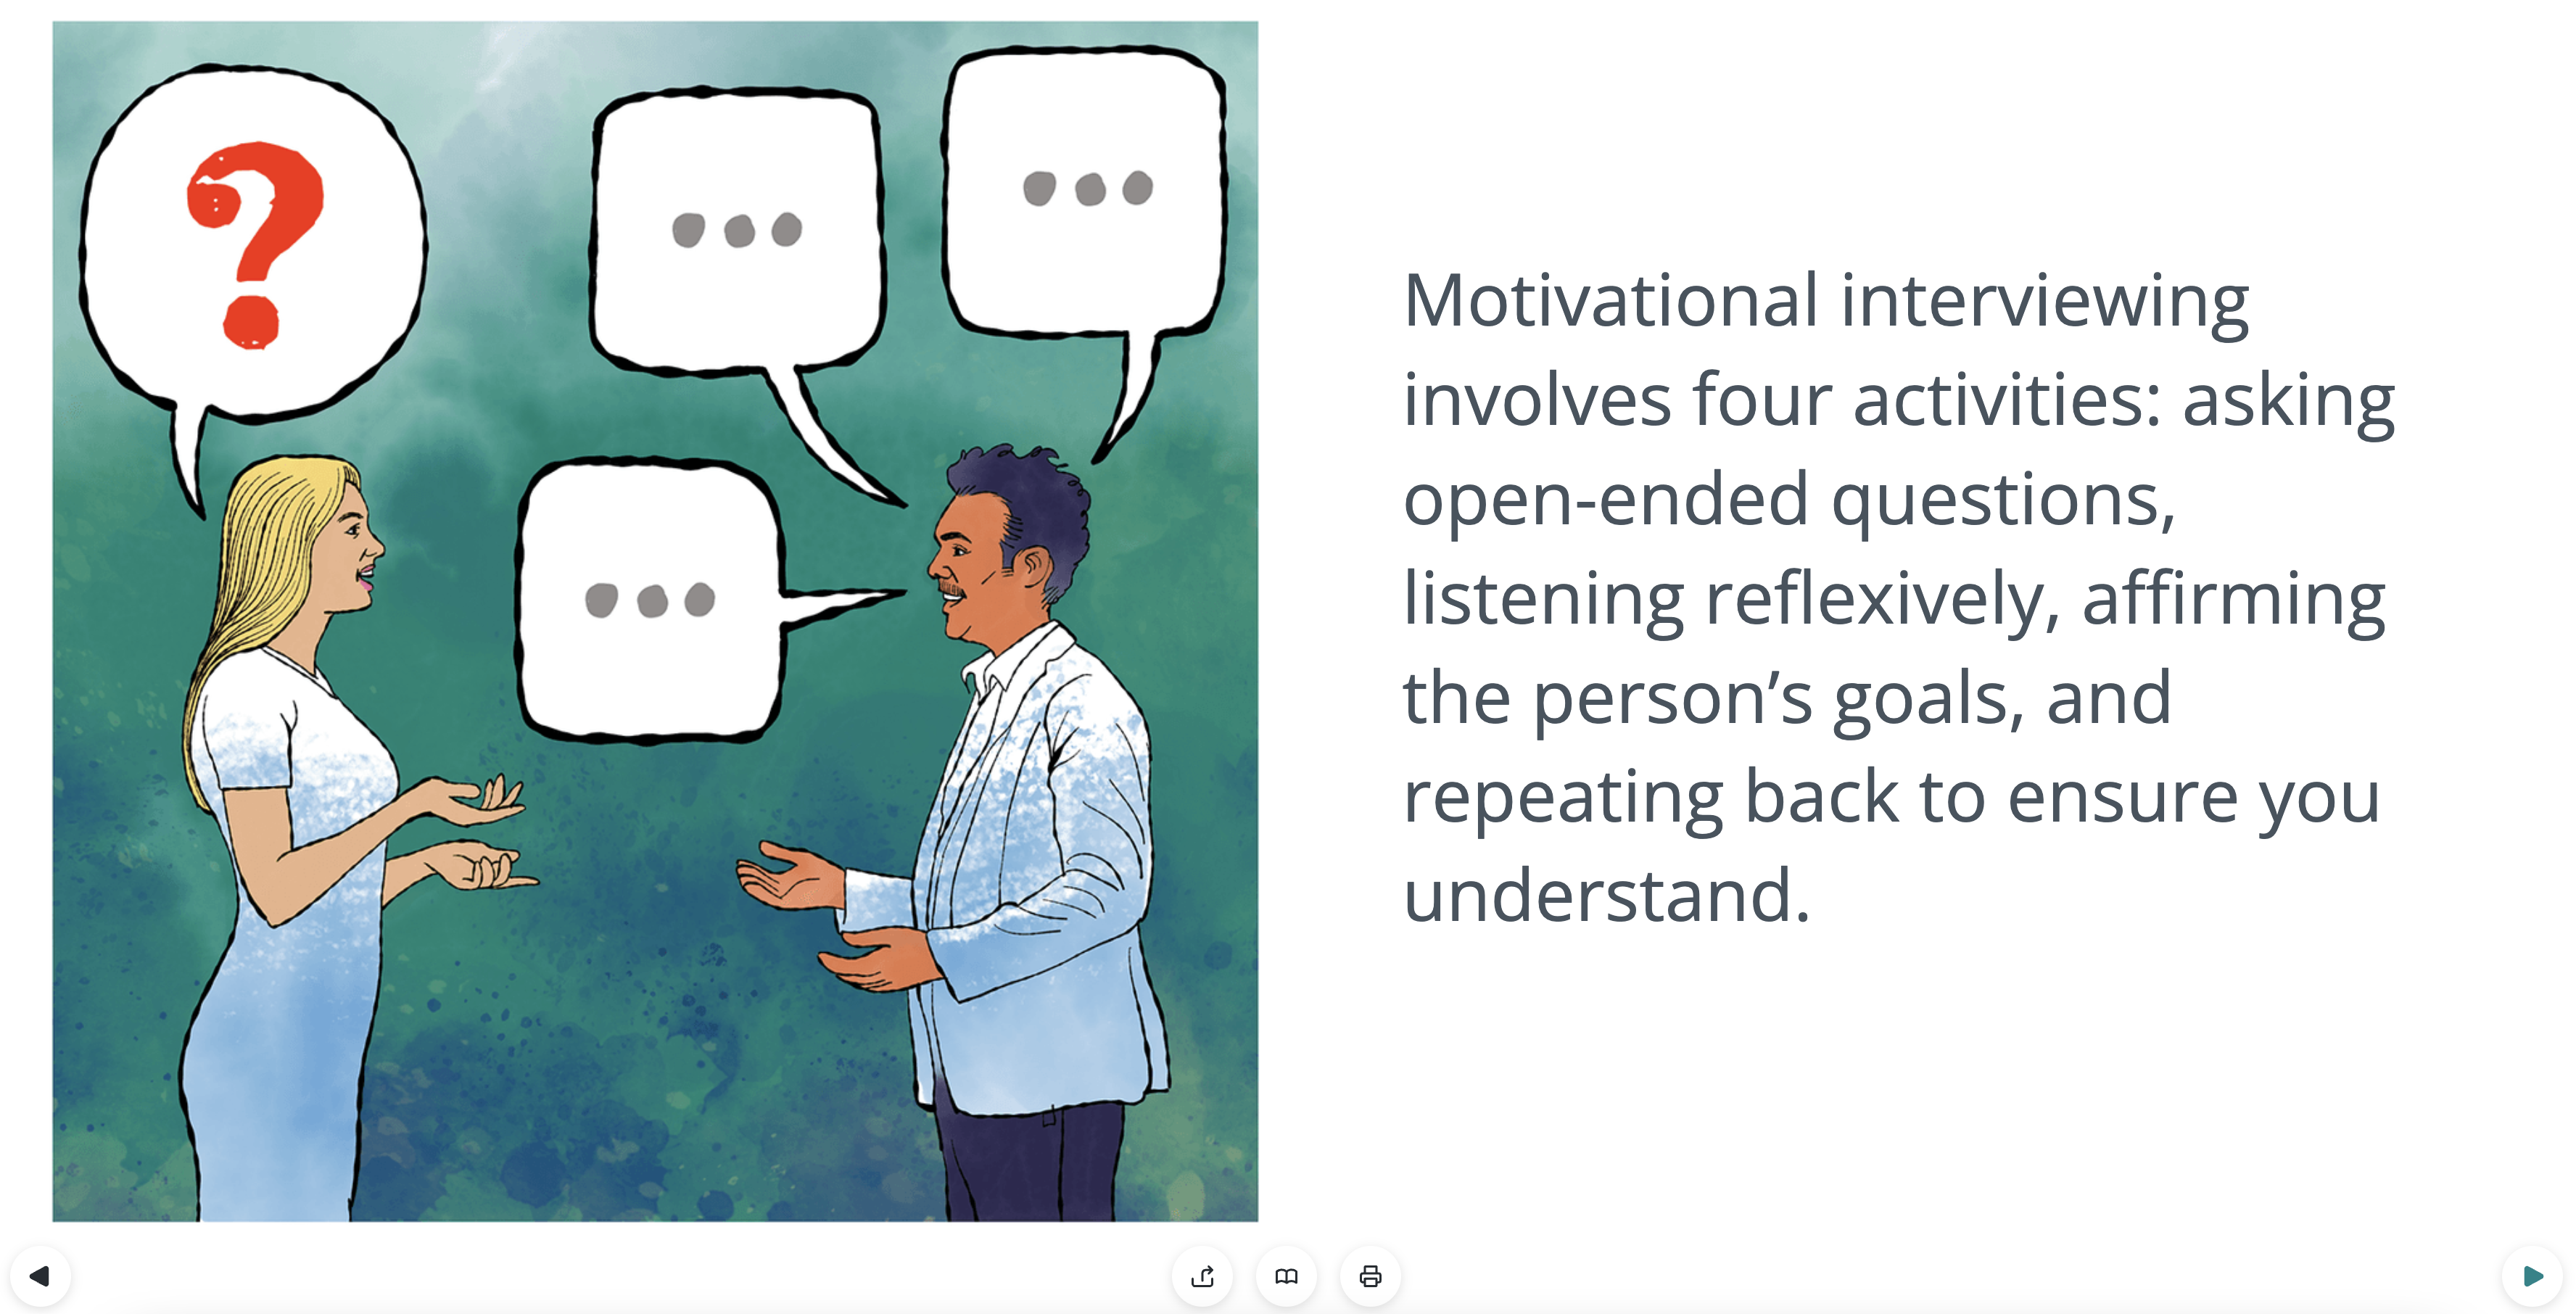 Screenshot from "What is Motivated Reasoning?" - two people disucssing with thought bubbles between them, depicting motivational interviewing